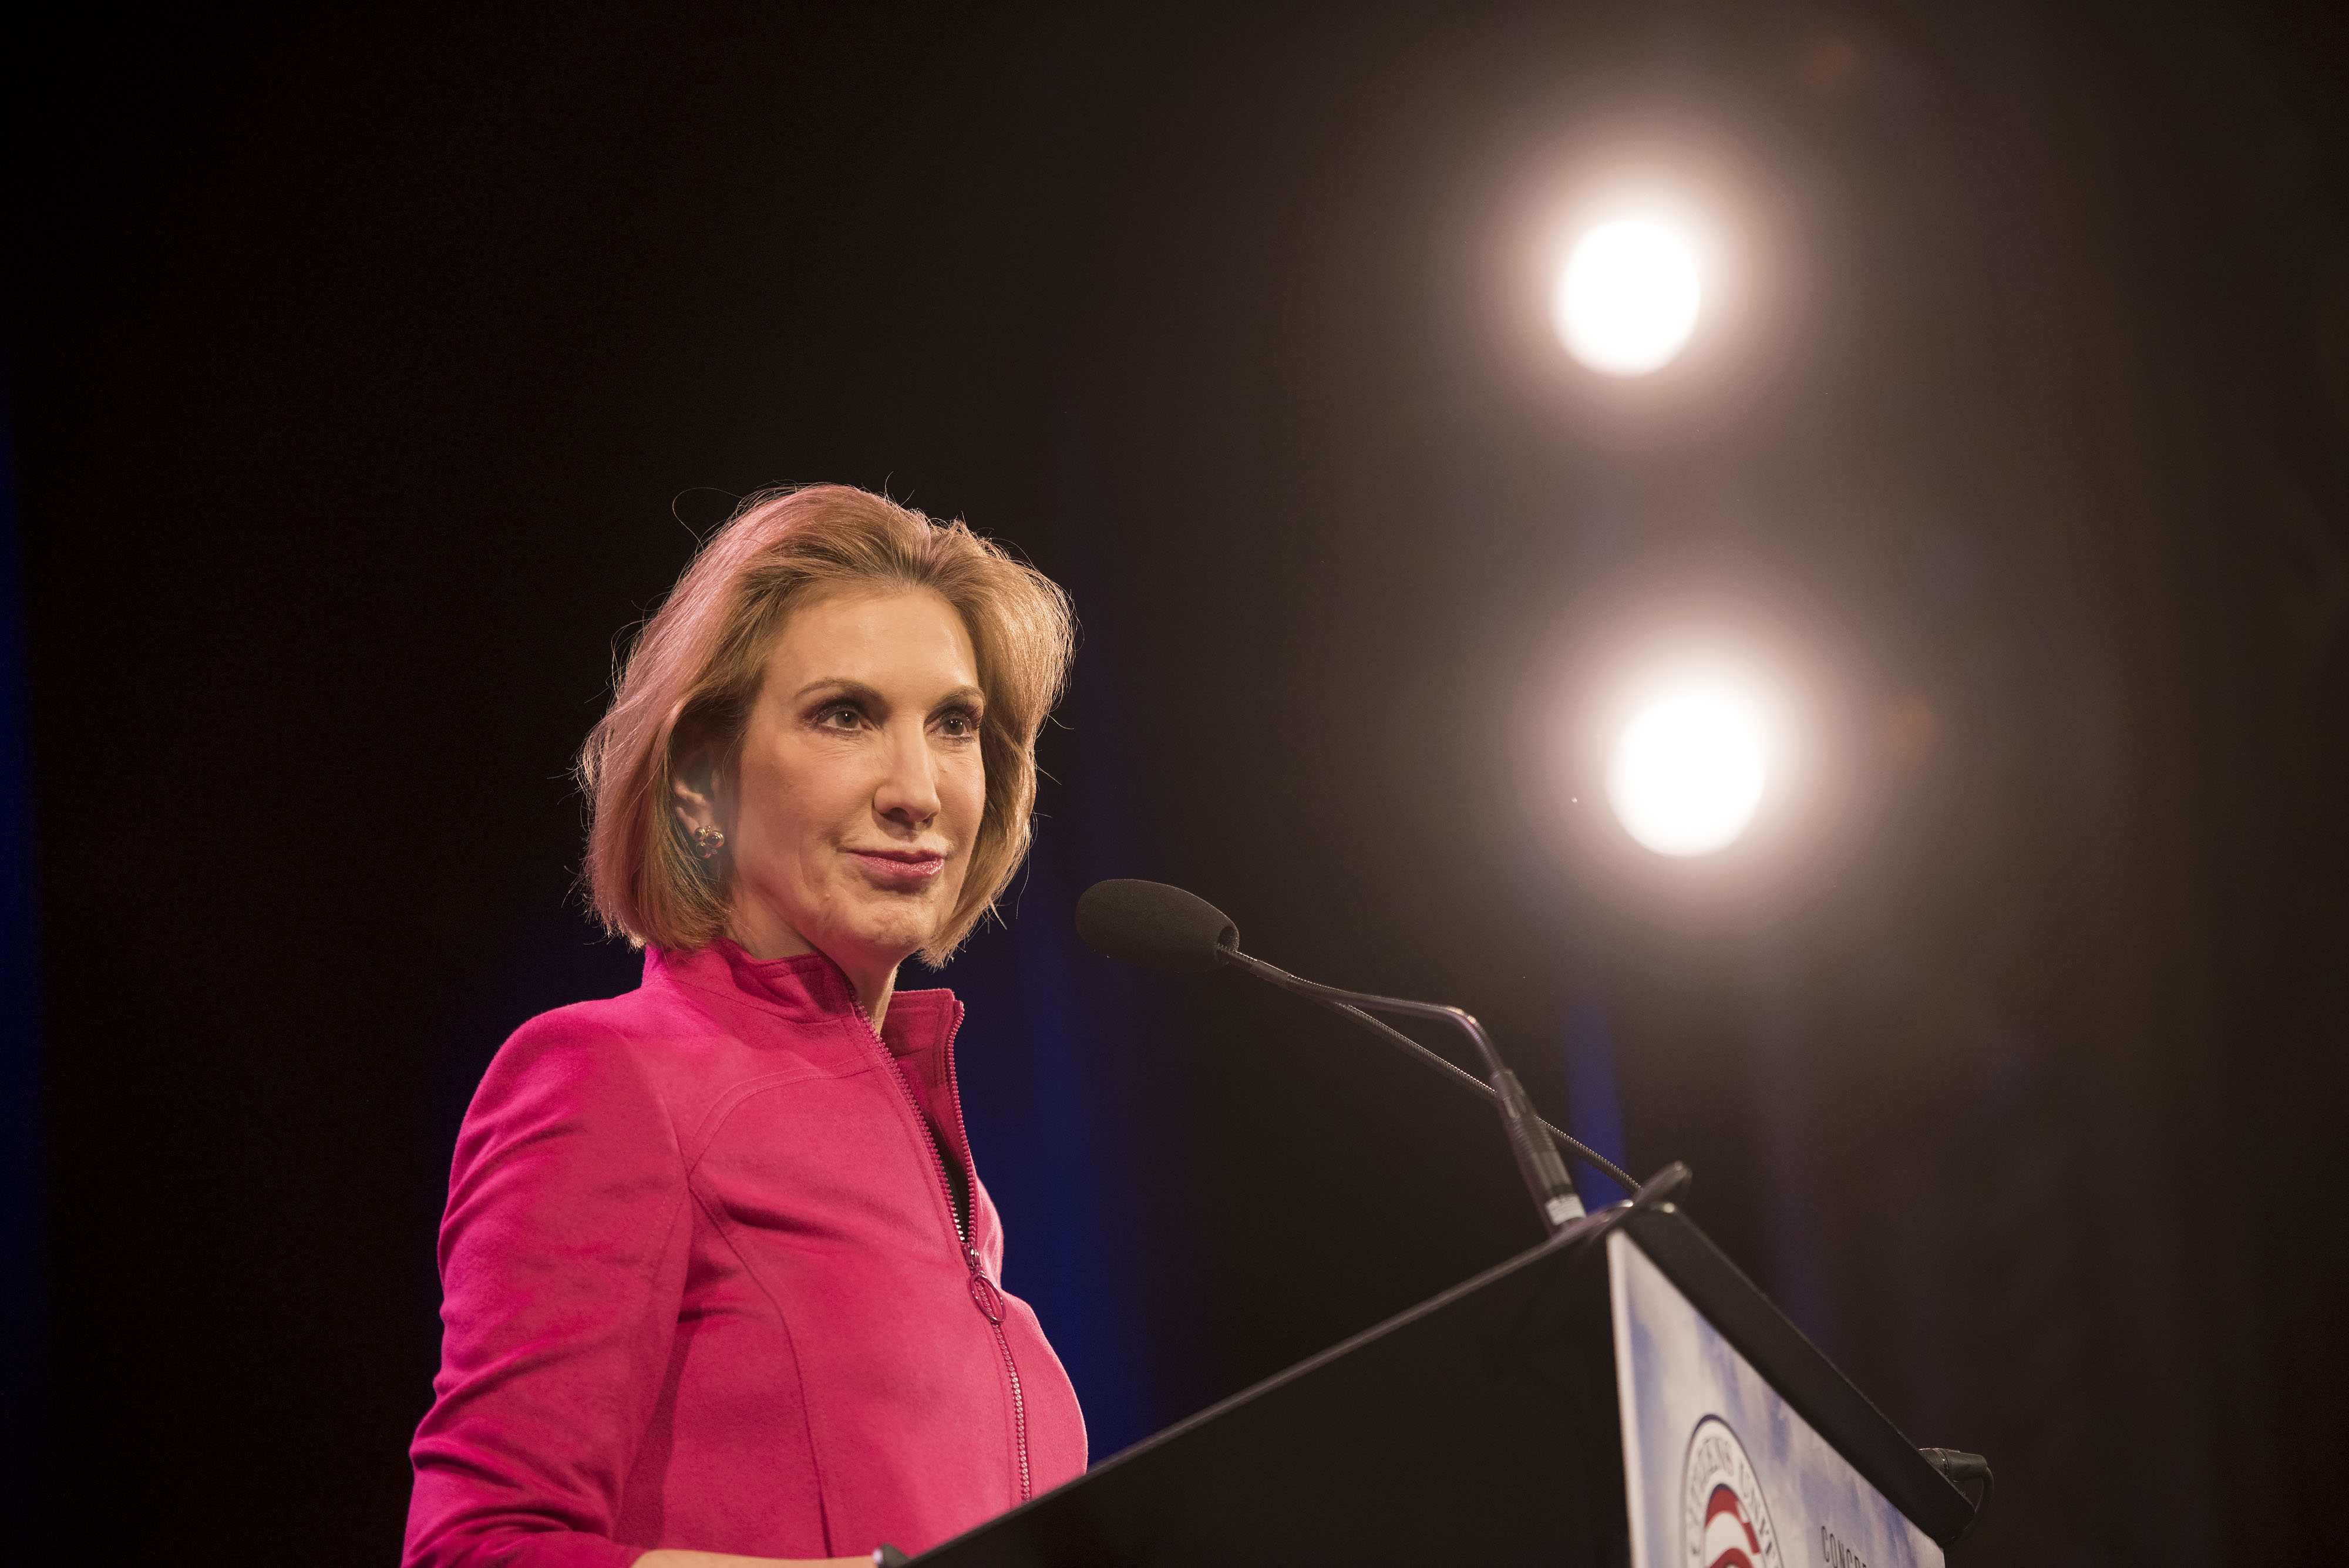 Carly Fiorina, former chairman and chief executive officer of Hewlett-Packard Co., during the Iowa Freedom Summit in Des Moines, Iowa on Jan. 24, 2015. (Daniel Acker—Bloomberg/Getty Images)